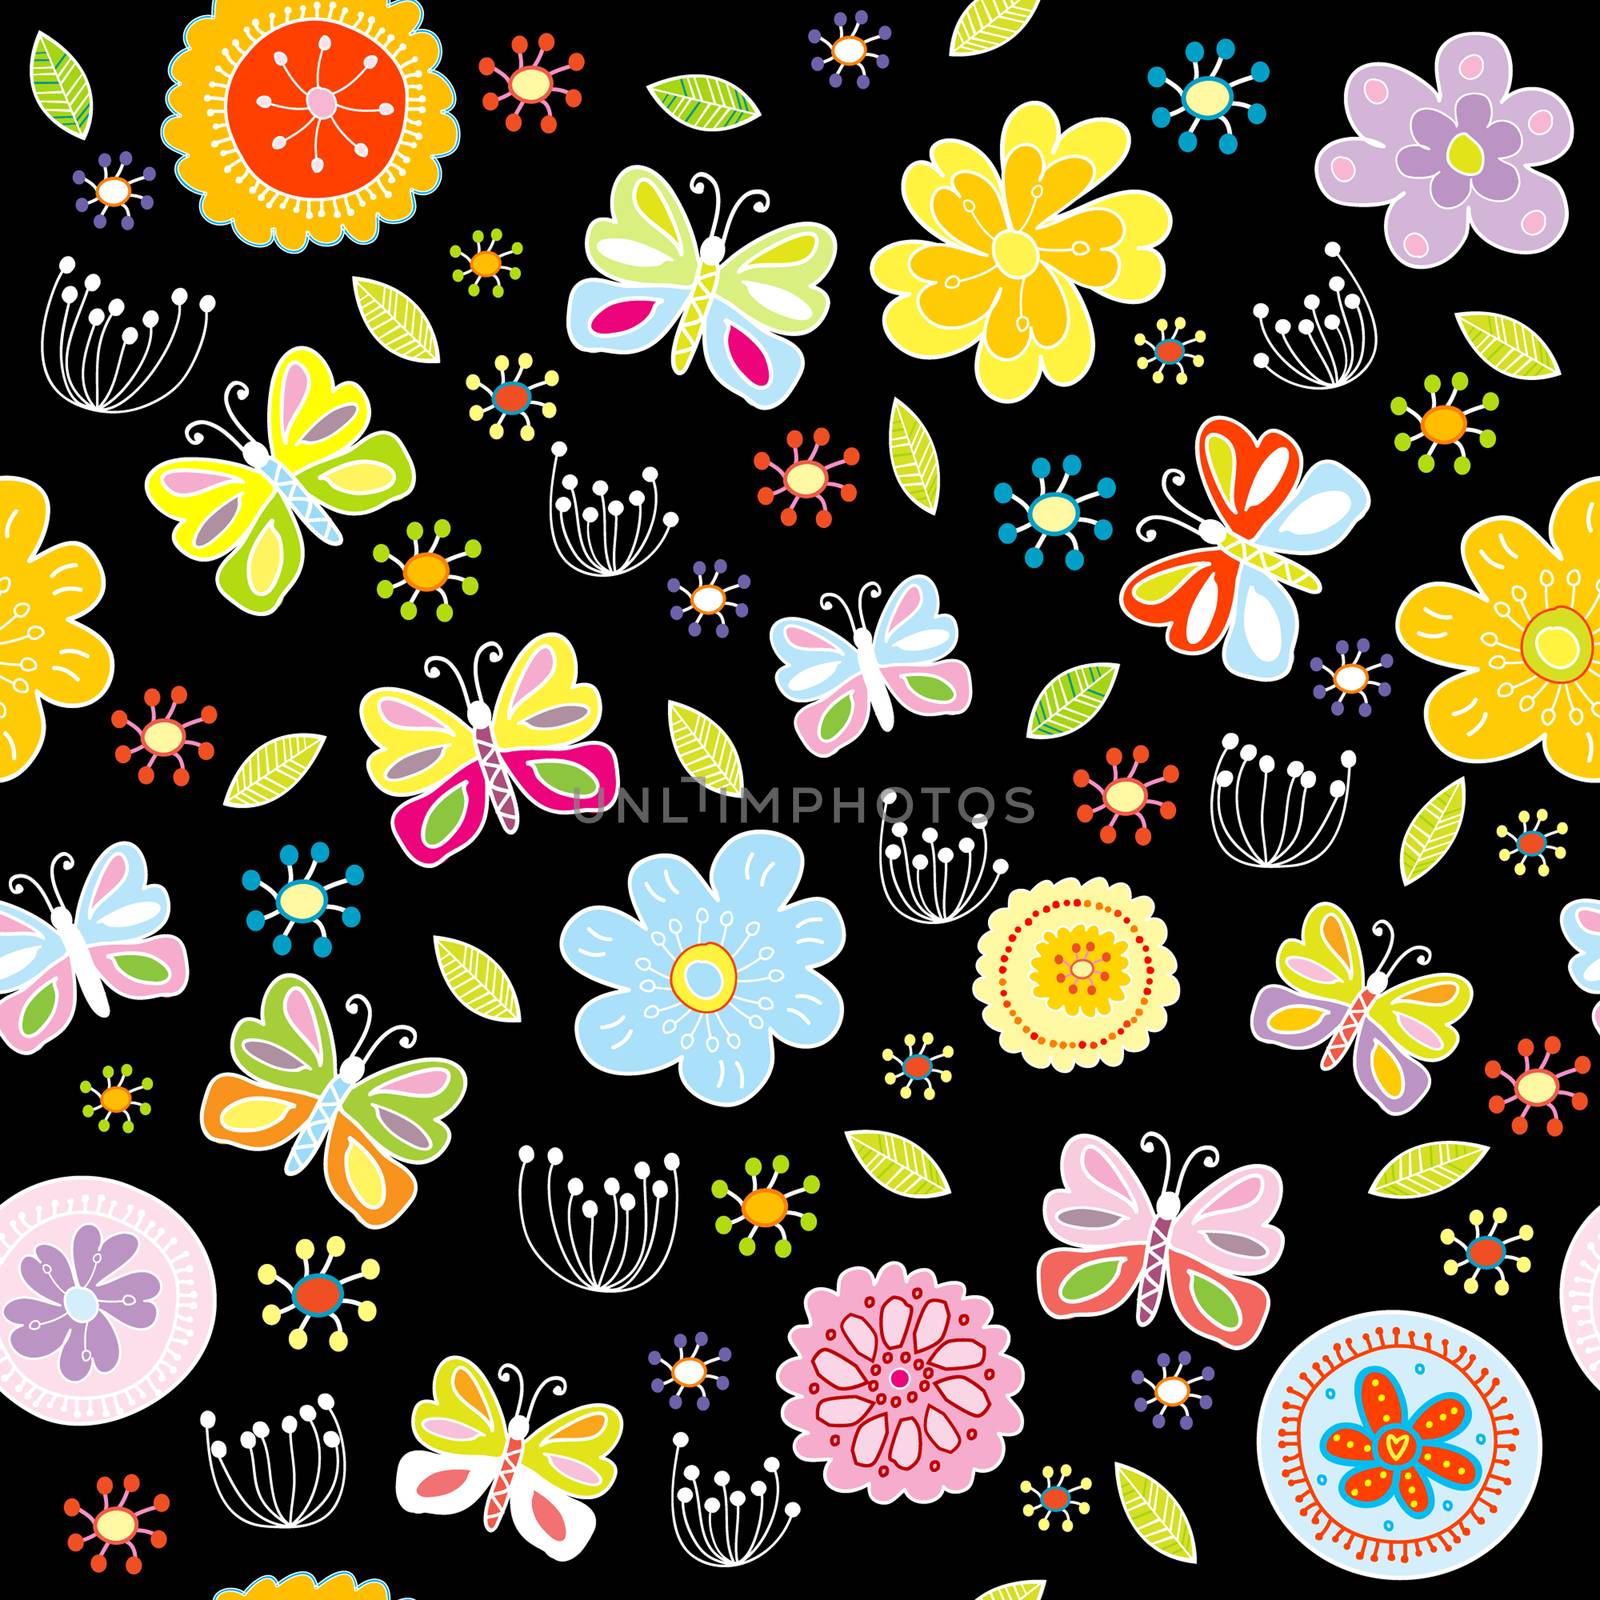 Floral pattern with butterflies on black background by hibrida13